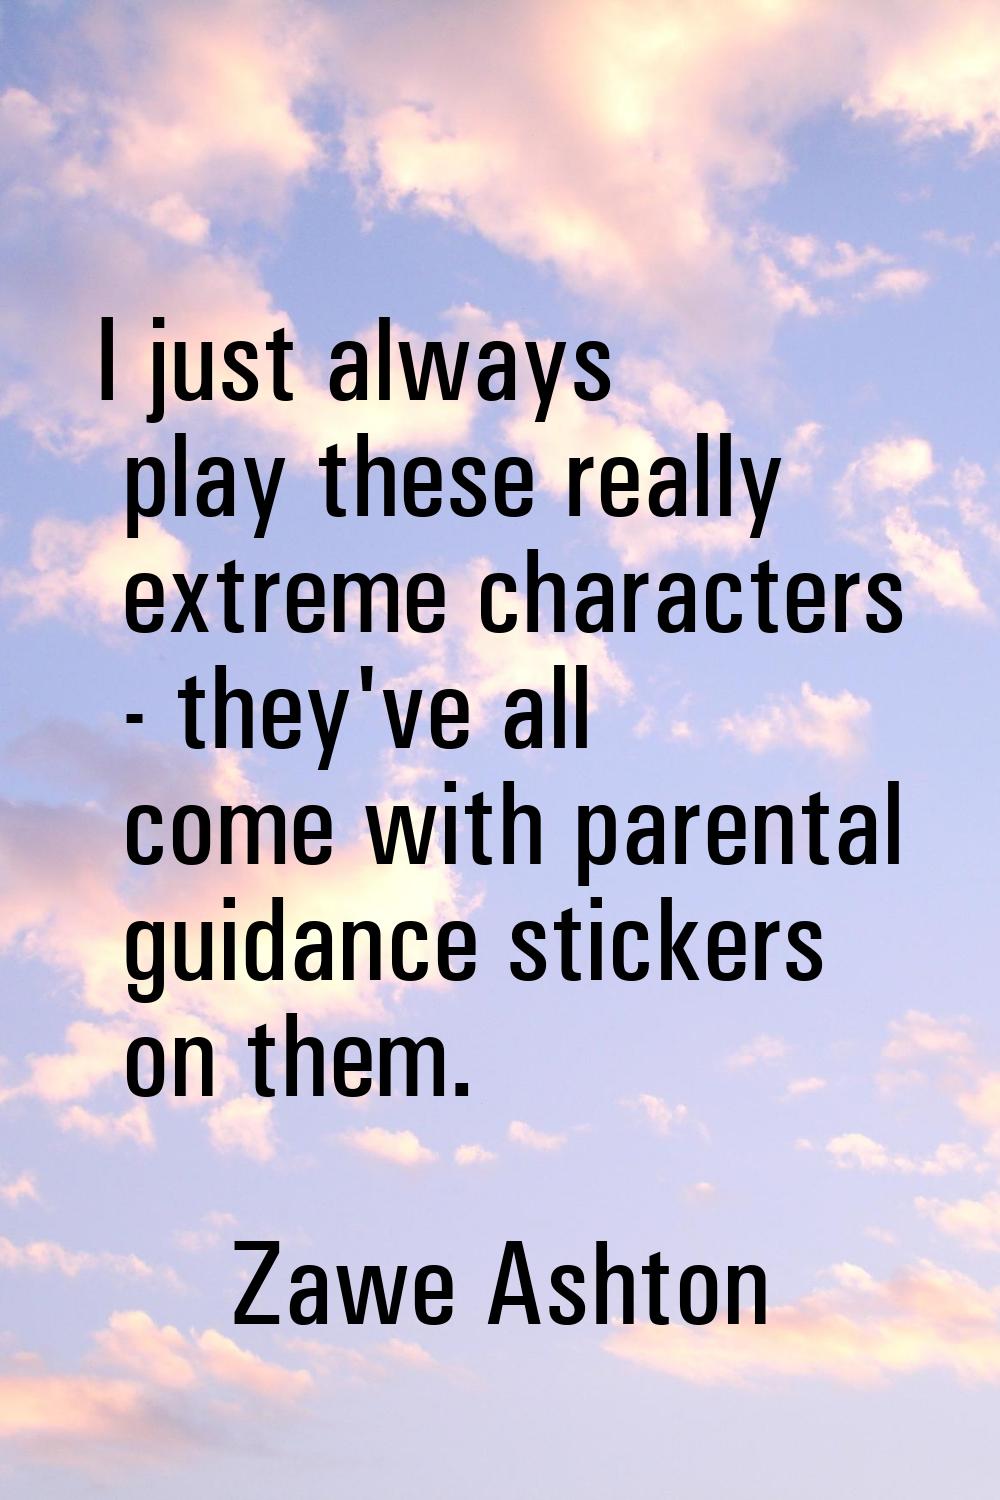 I just always play these really extreme characters - they've all come with parental guidance sticke